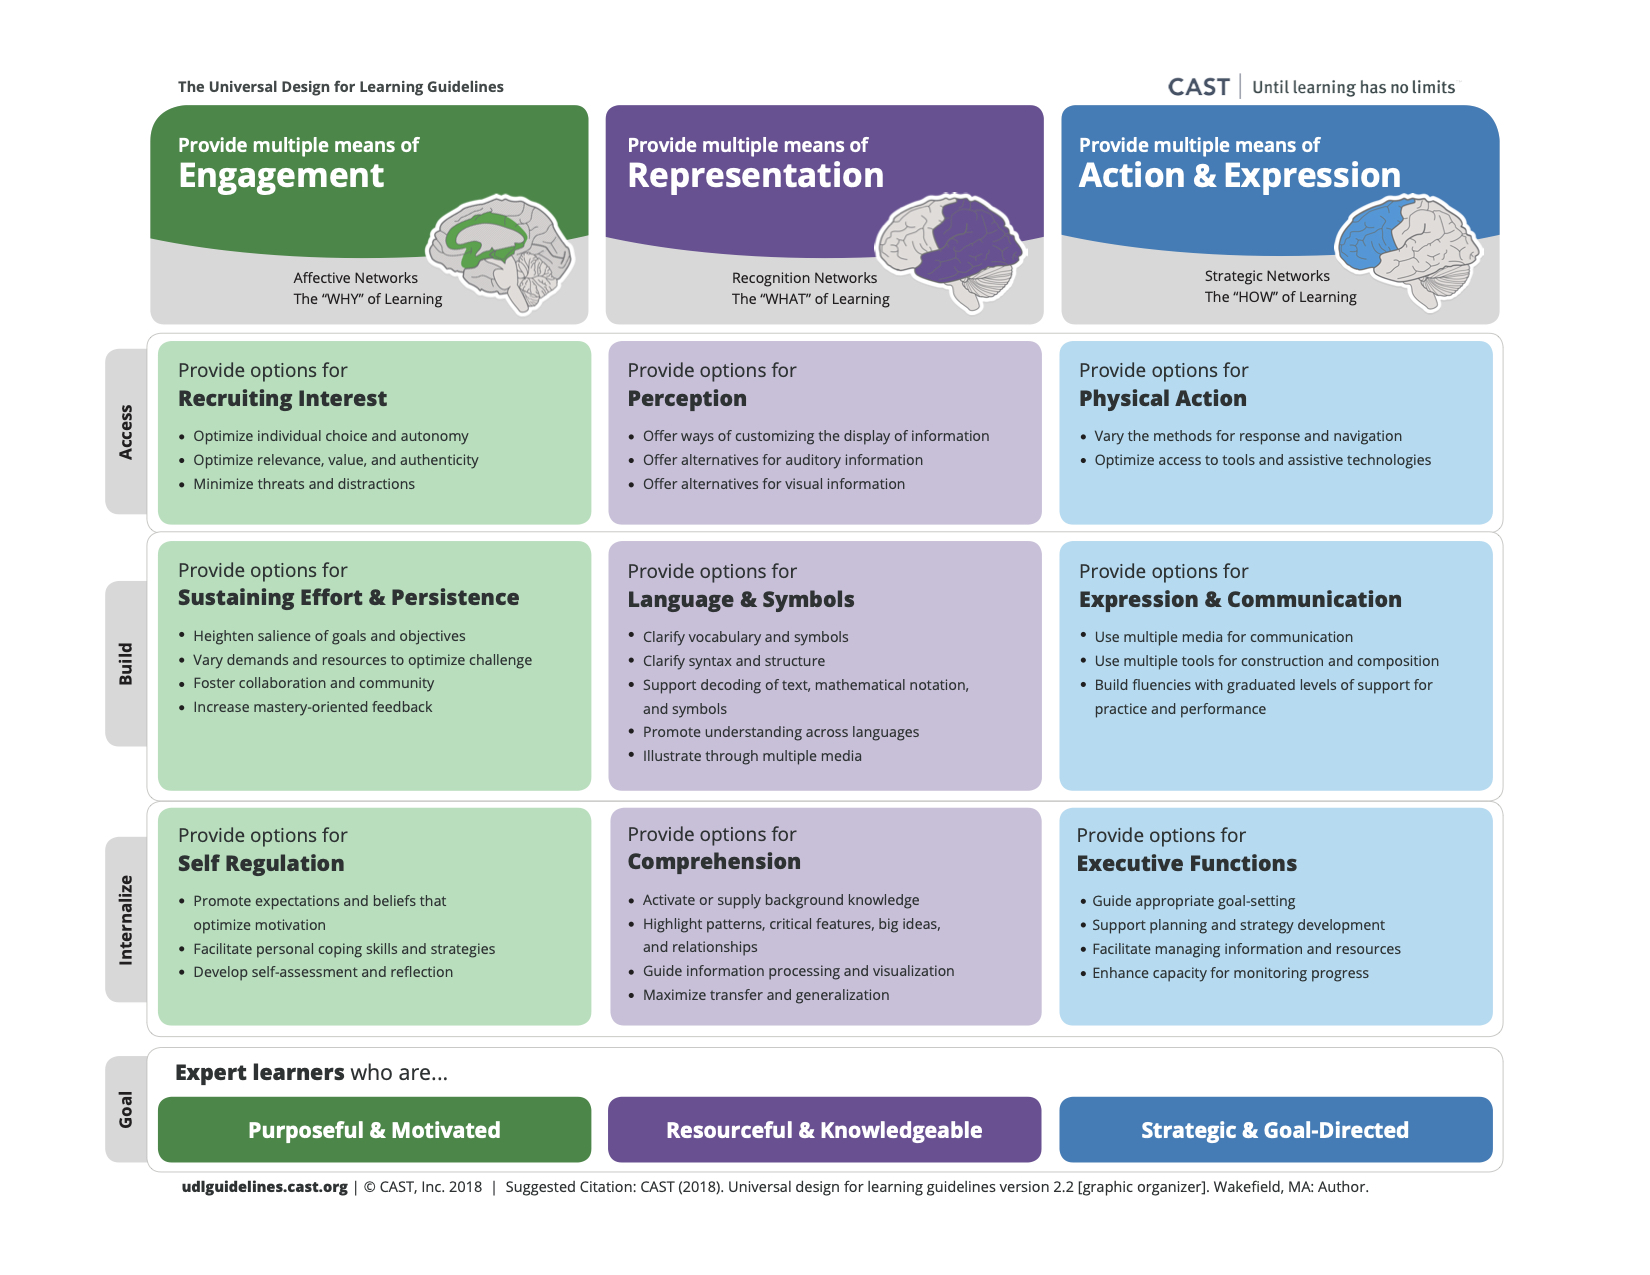 image of the UDL Guidelines tool